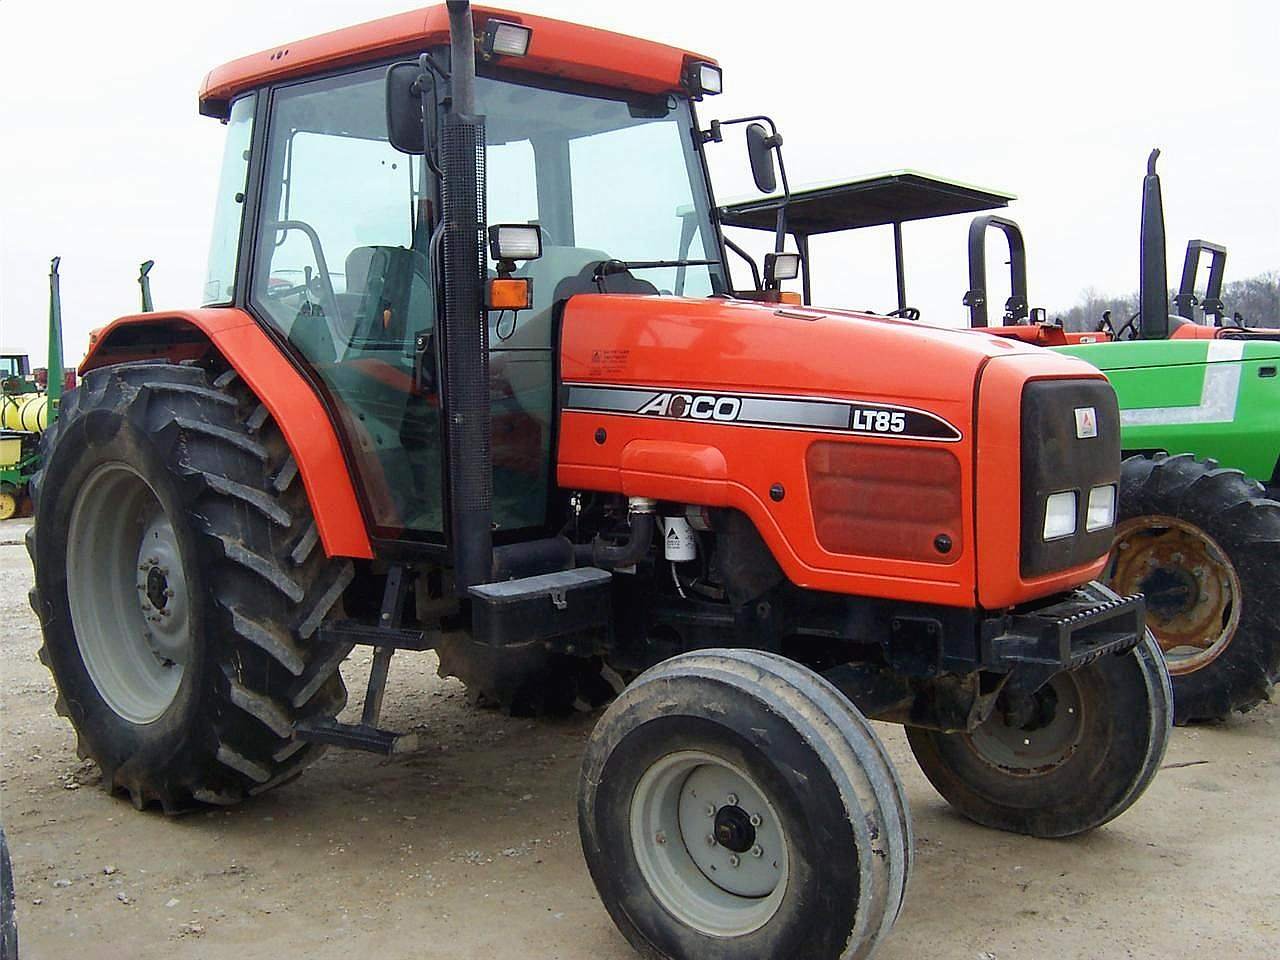 2002 Agco Lt85 Photo, Detailed about 2002 Agco Lt85 Picture on Alibaba ...